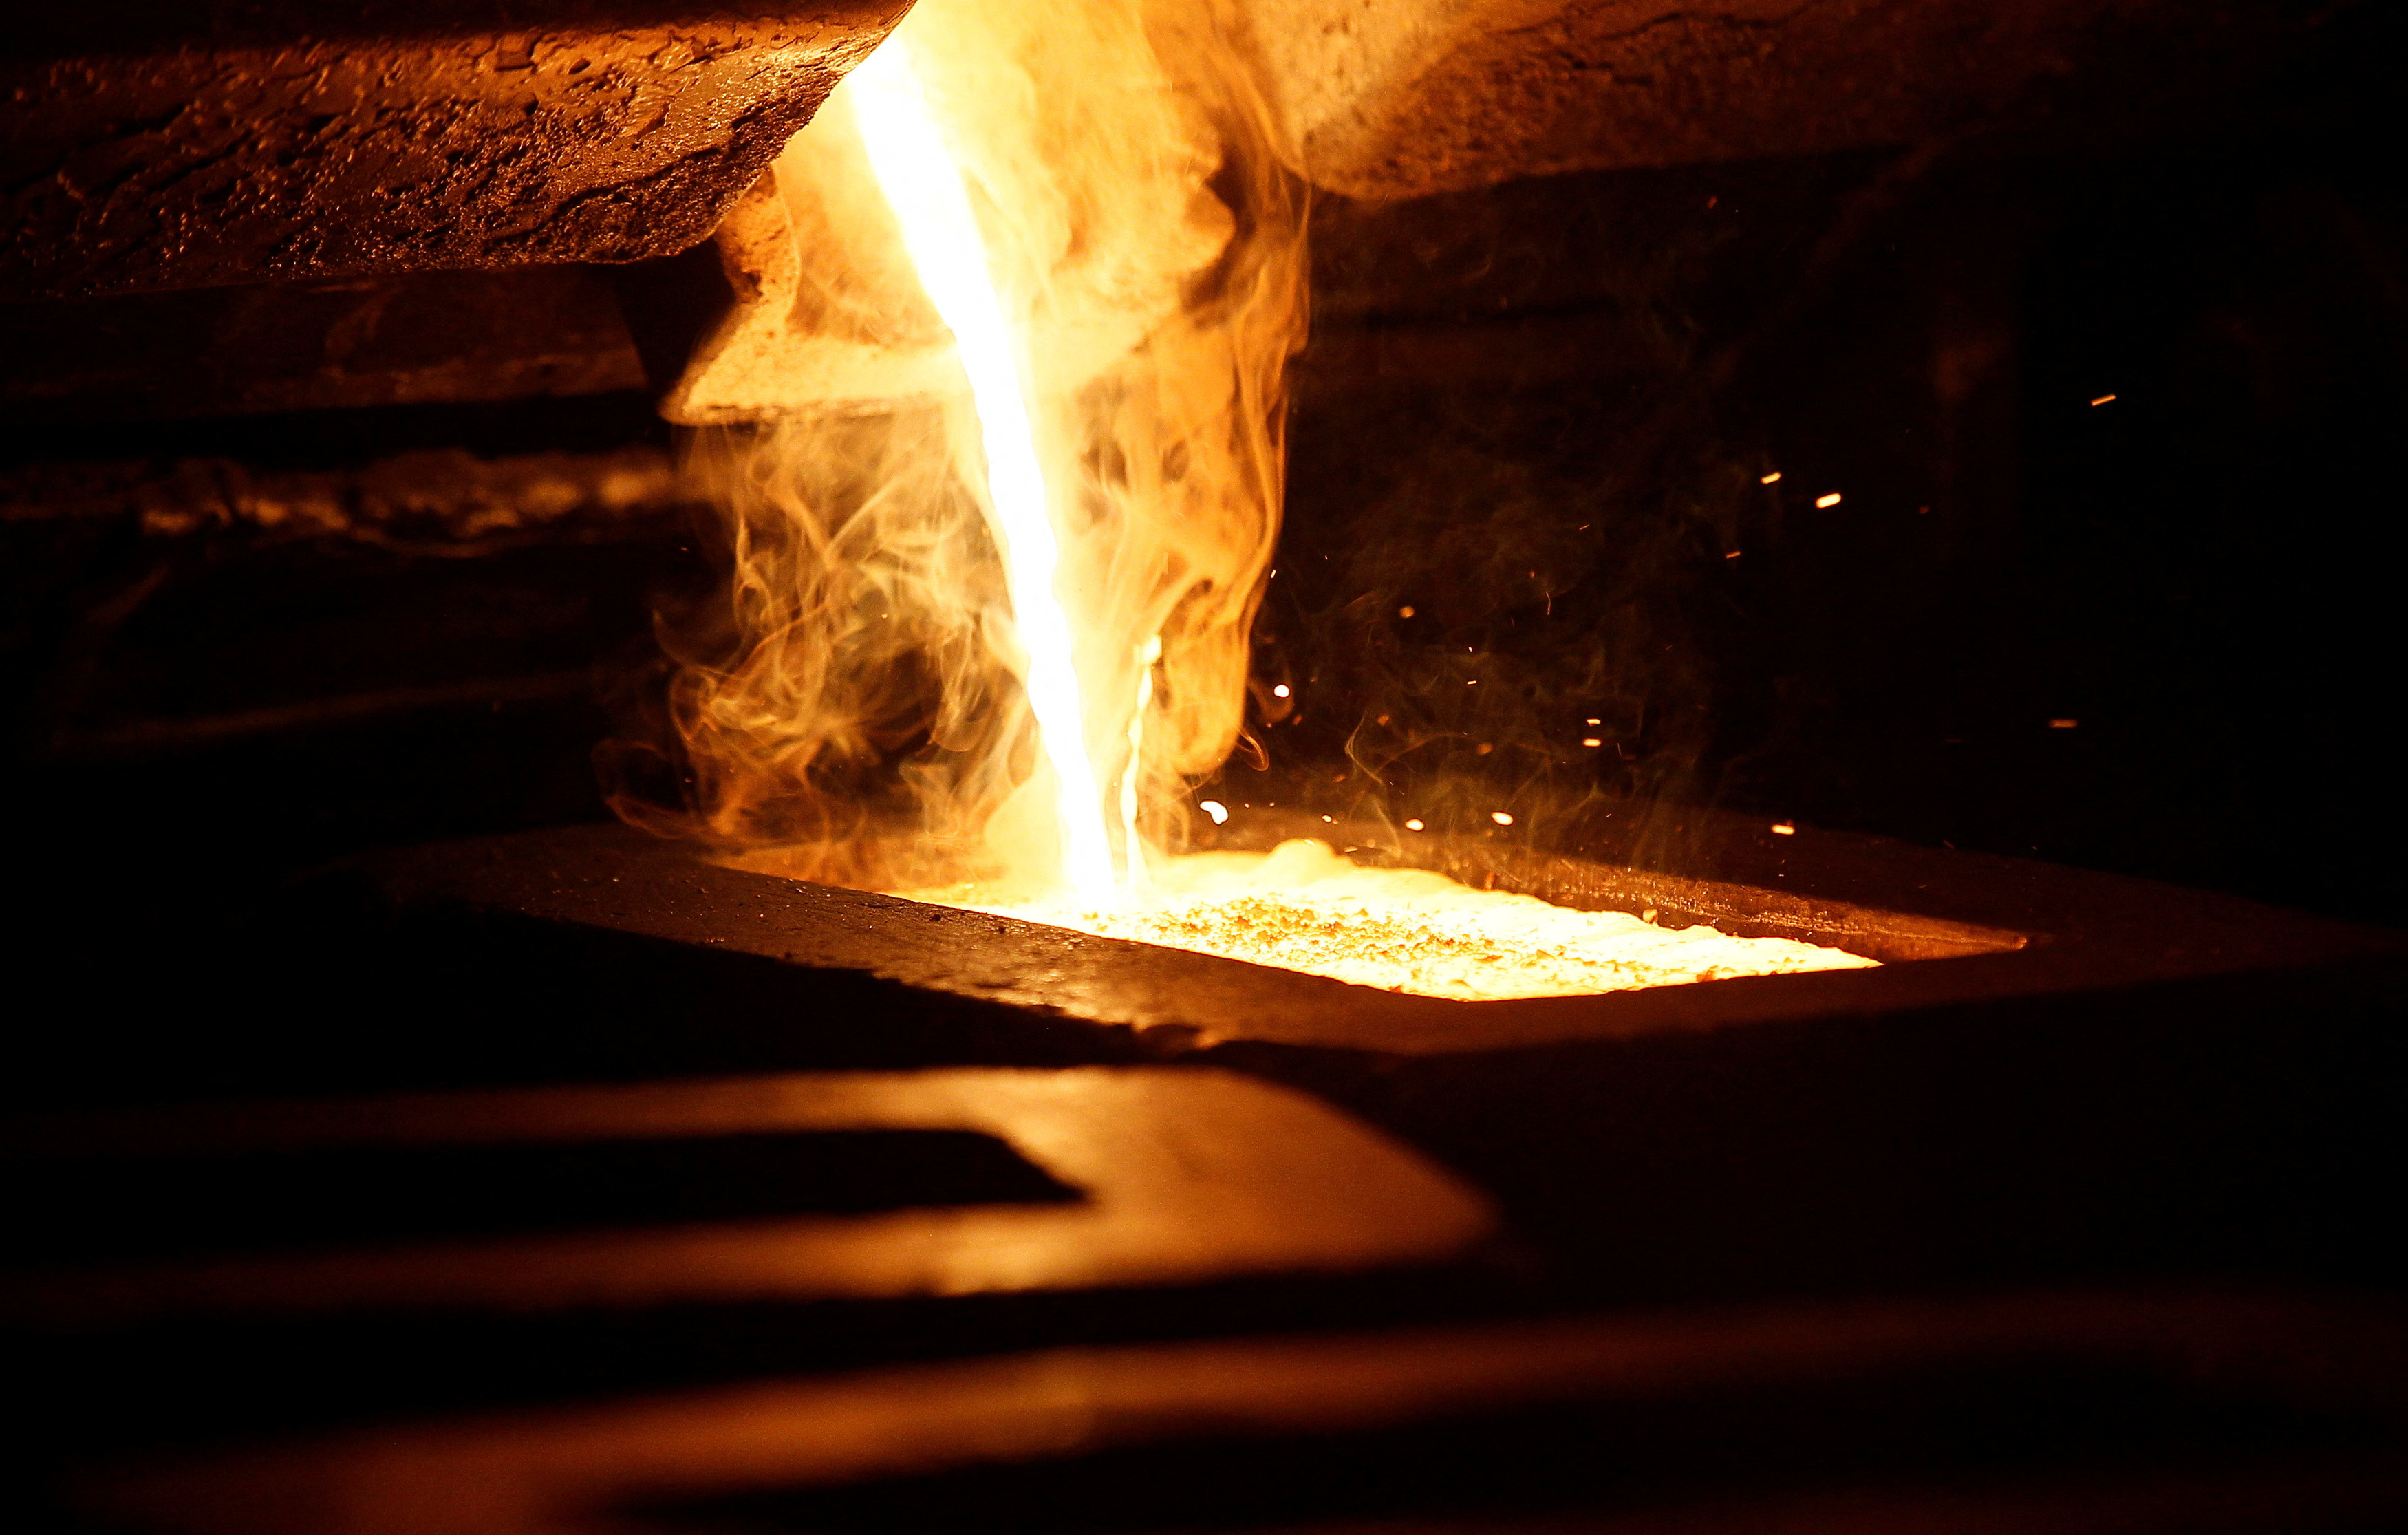 Liquid gold is poured to form gold dore bars at Newmont Mining's Carlin gold mine operation near Elko